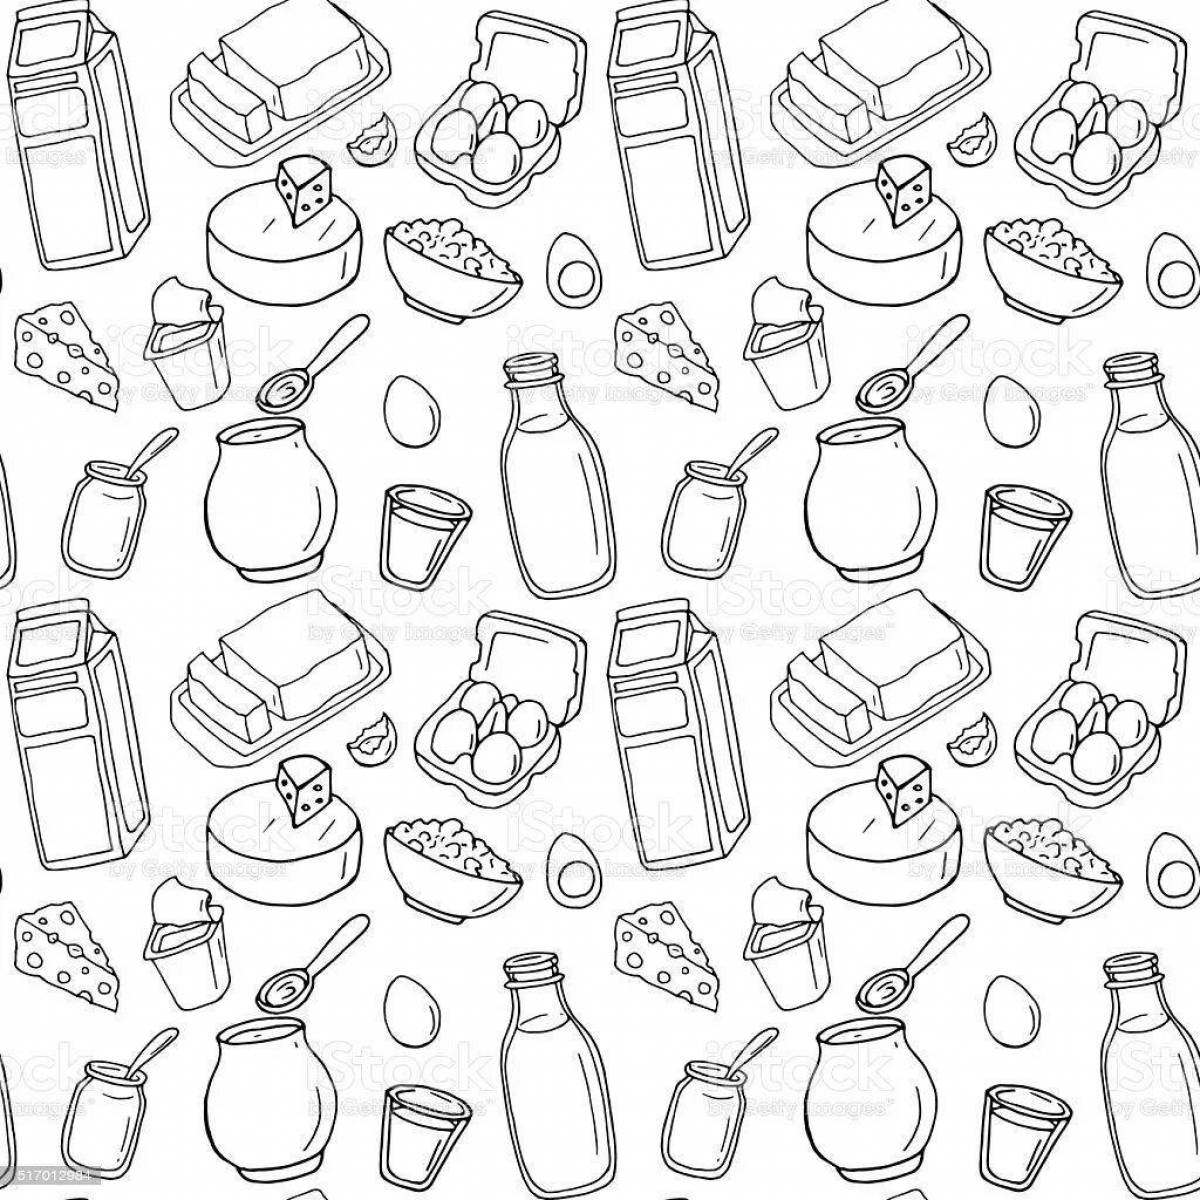 Live dairy products coloring pages for children